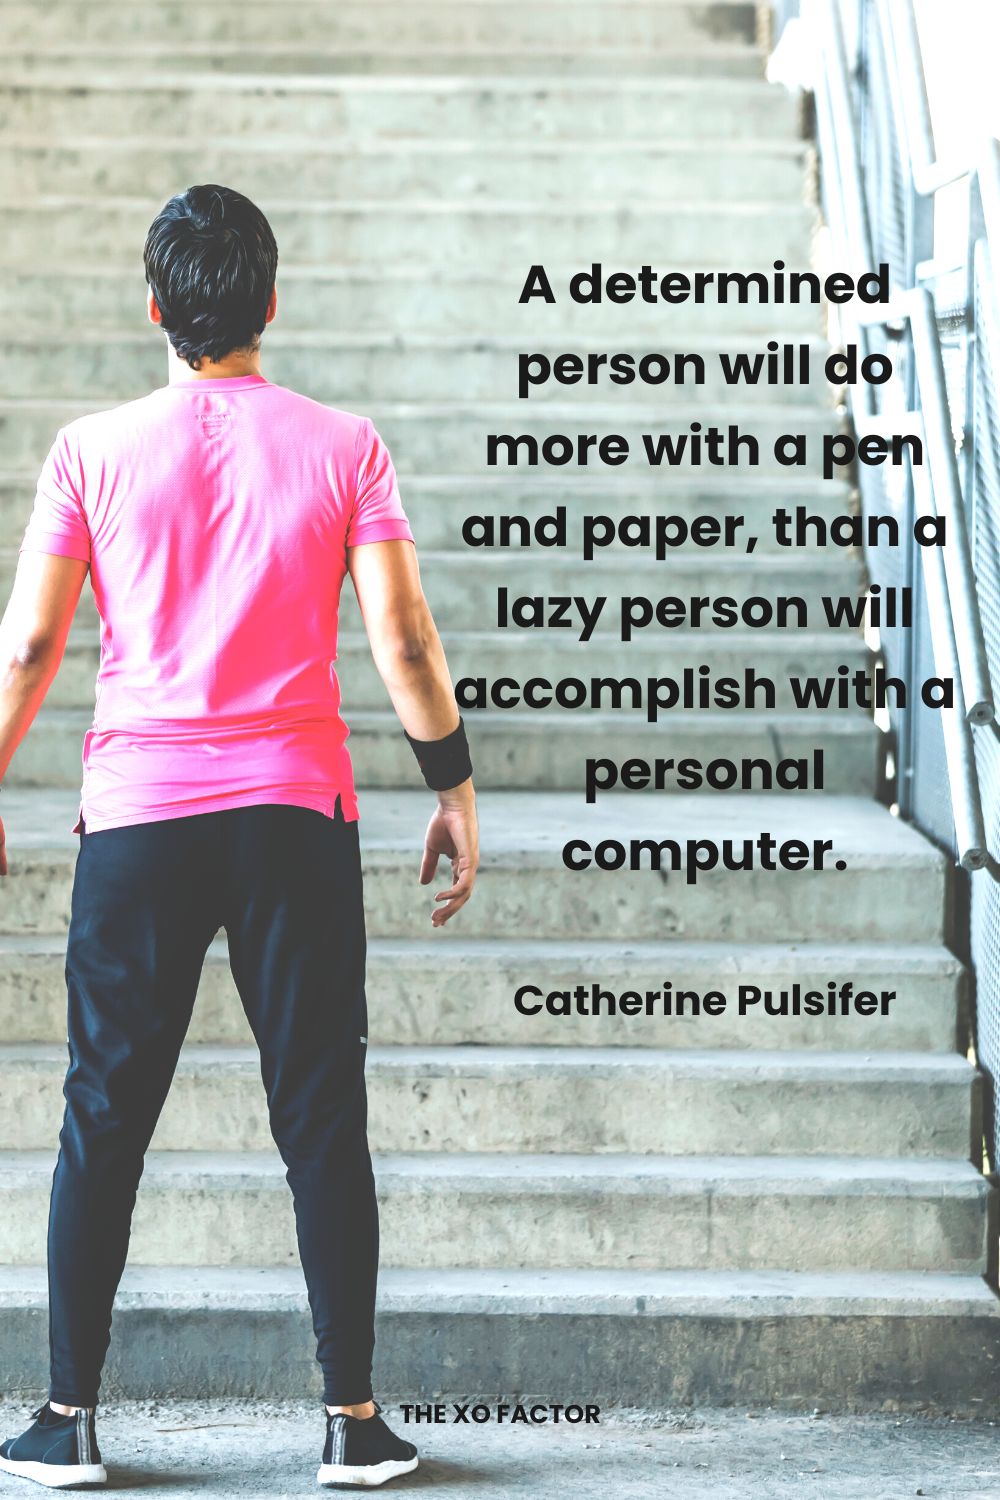 A determined person will do more with a pen and paper, than a lazy person will accomplish with a personal computer. Catherine Pulsifer